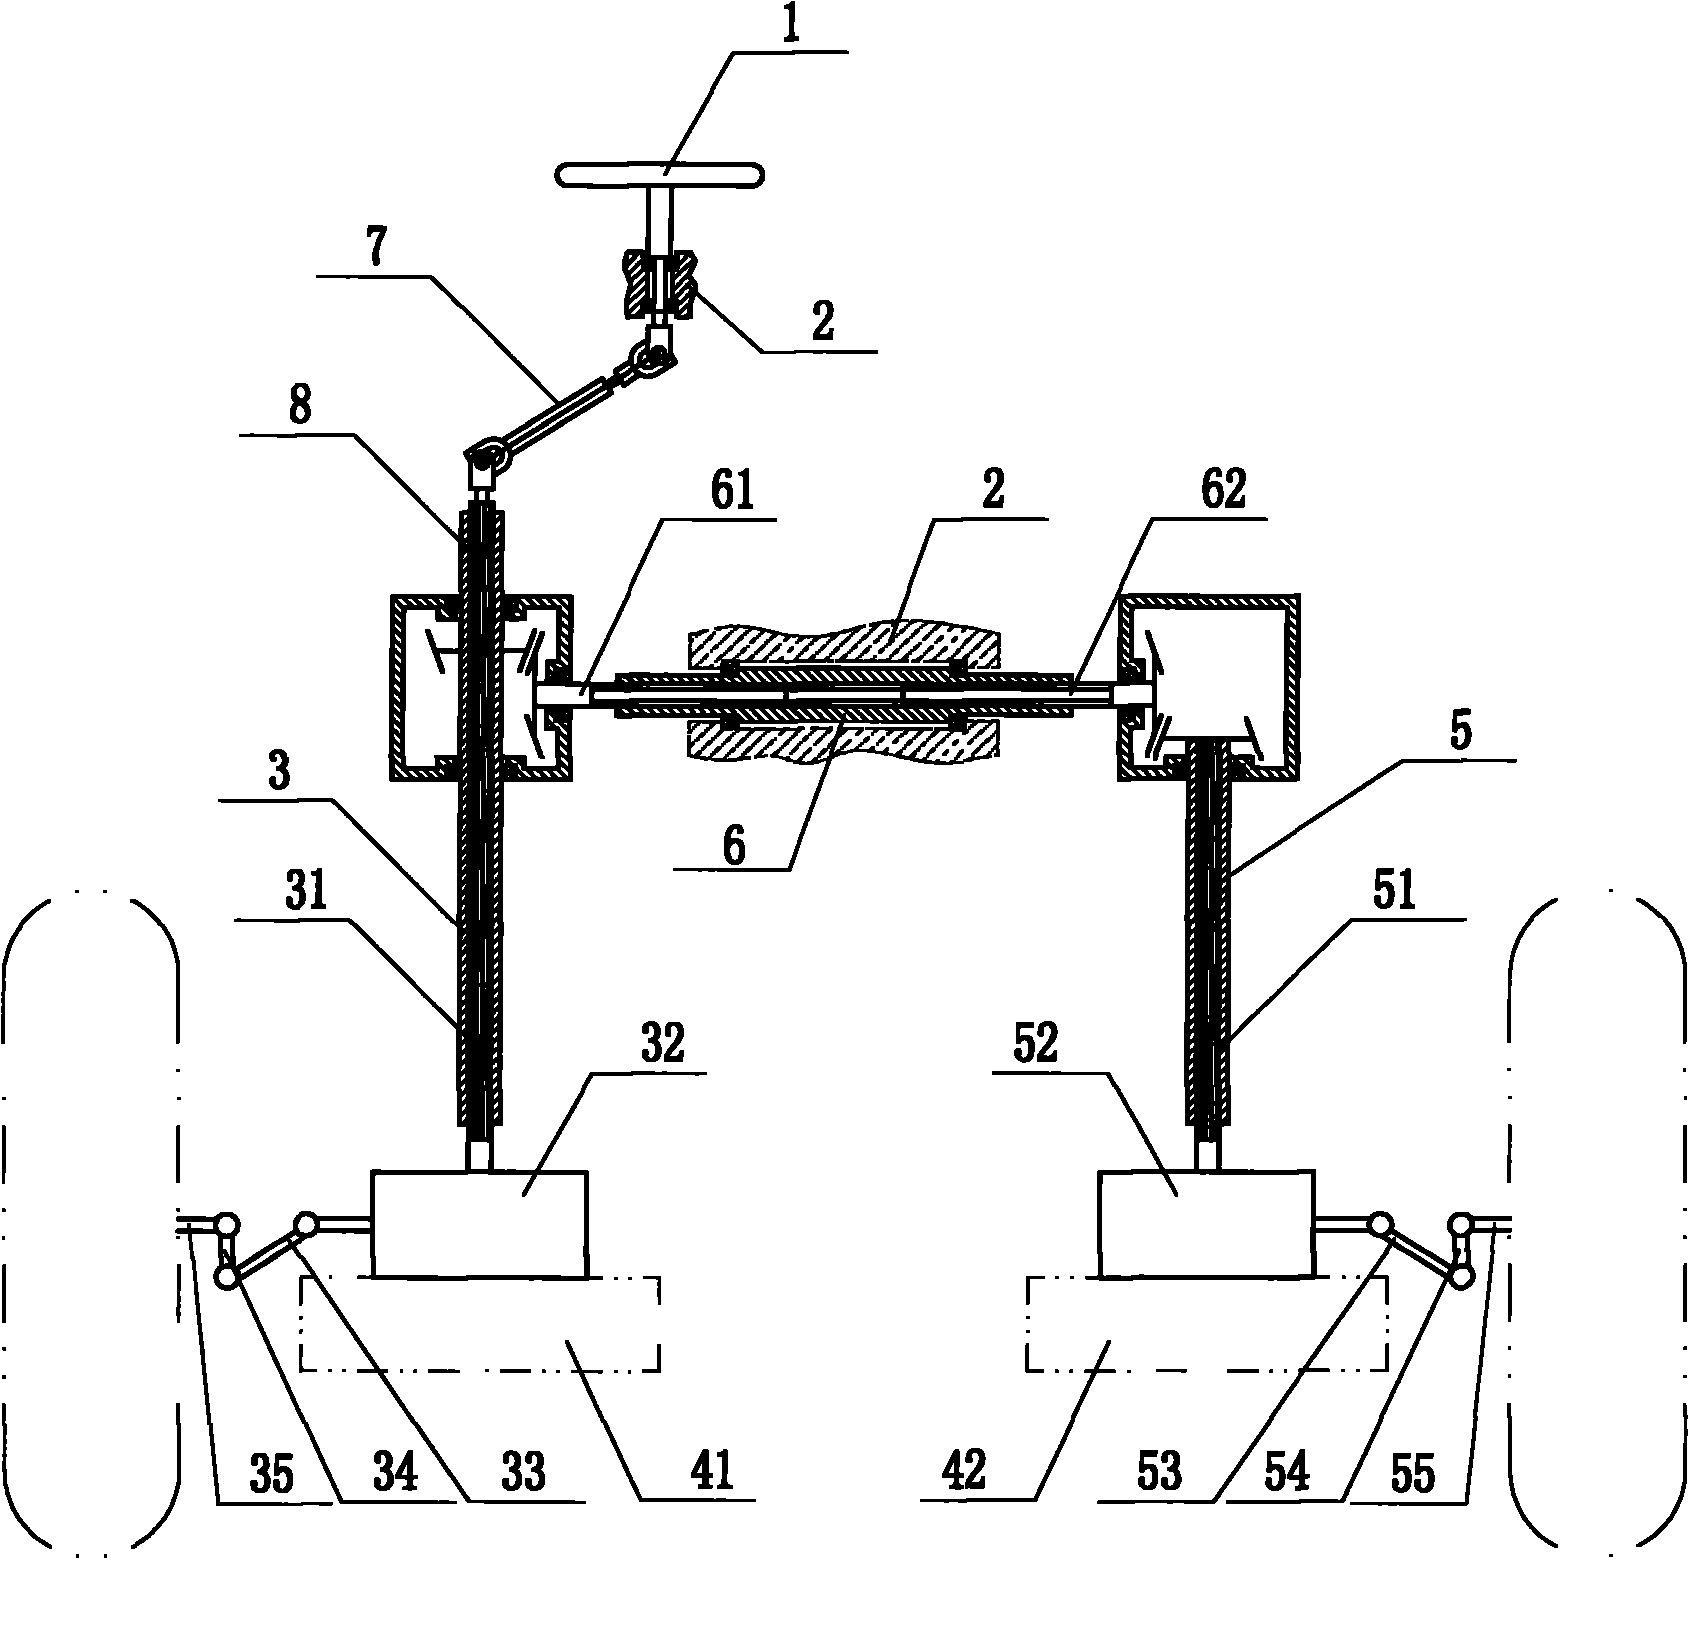 Front steering device capable of changing wheel span and ground clearance